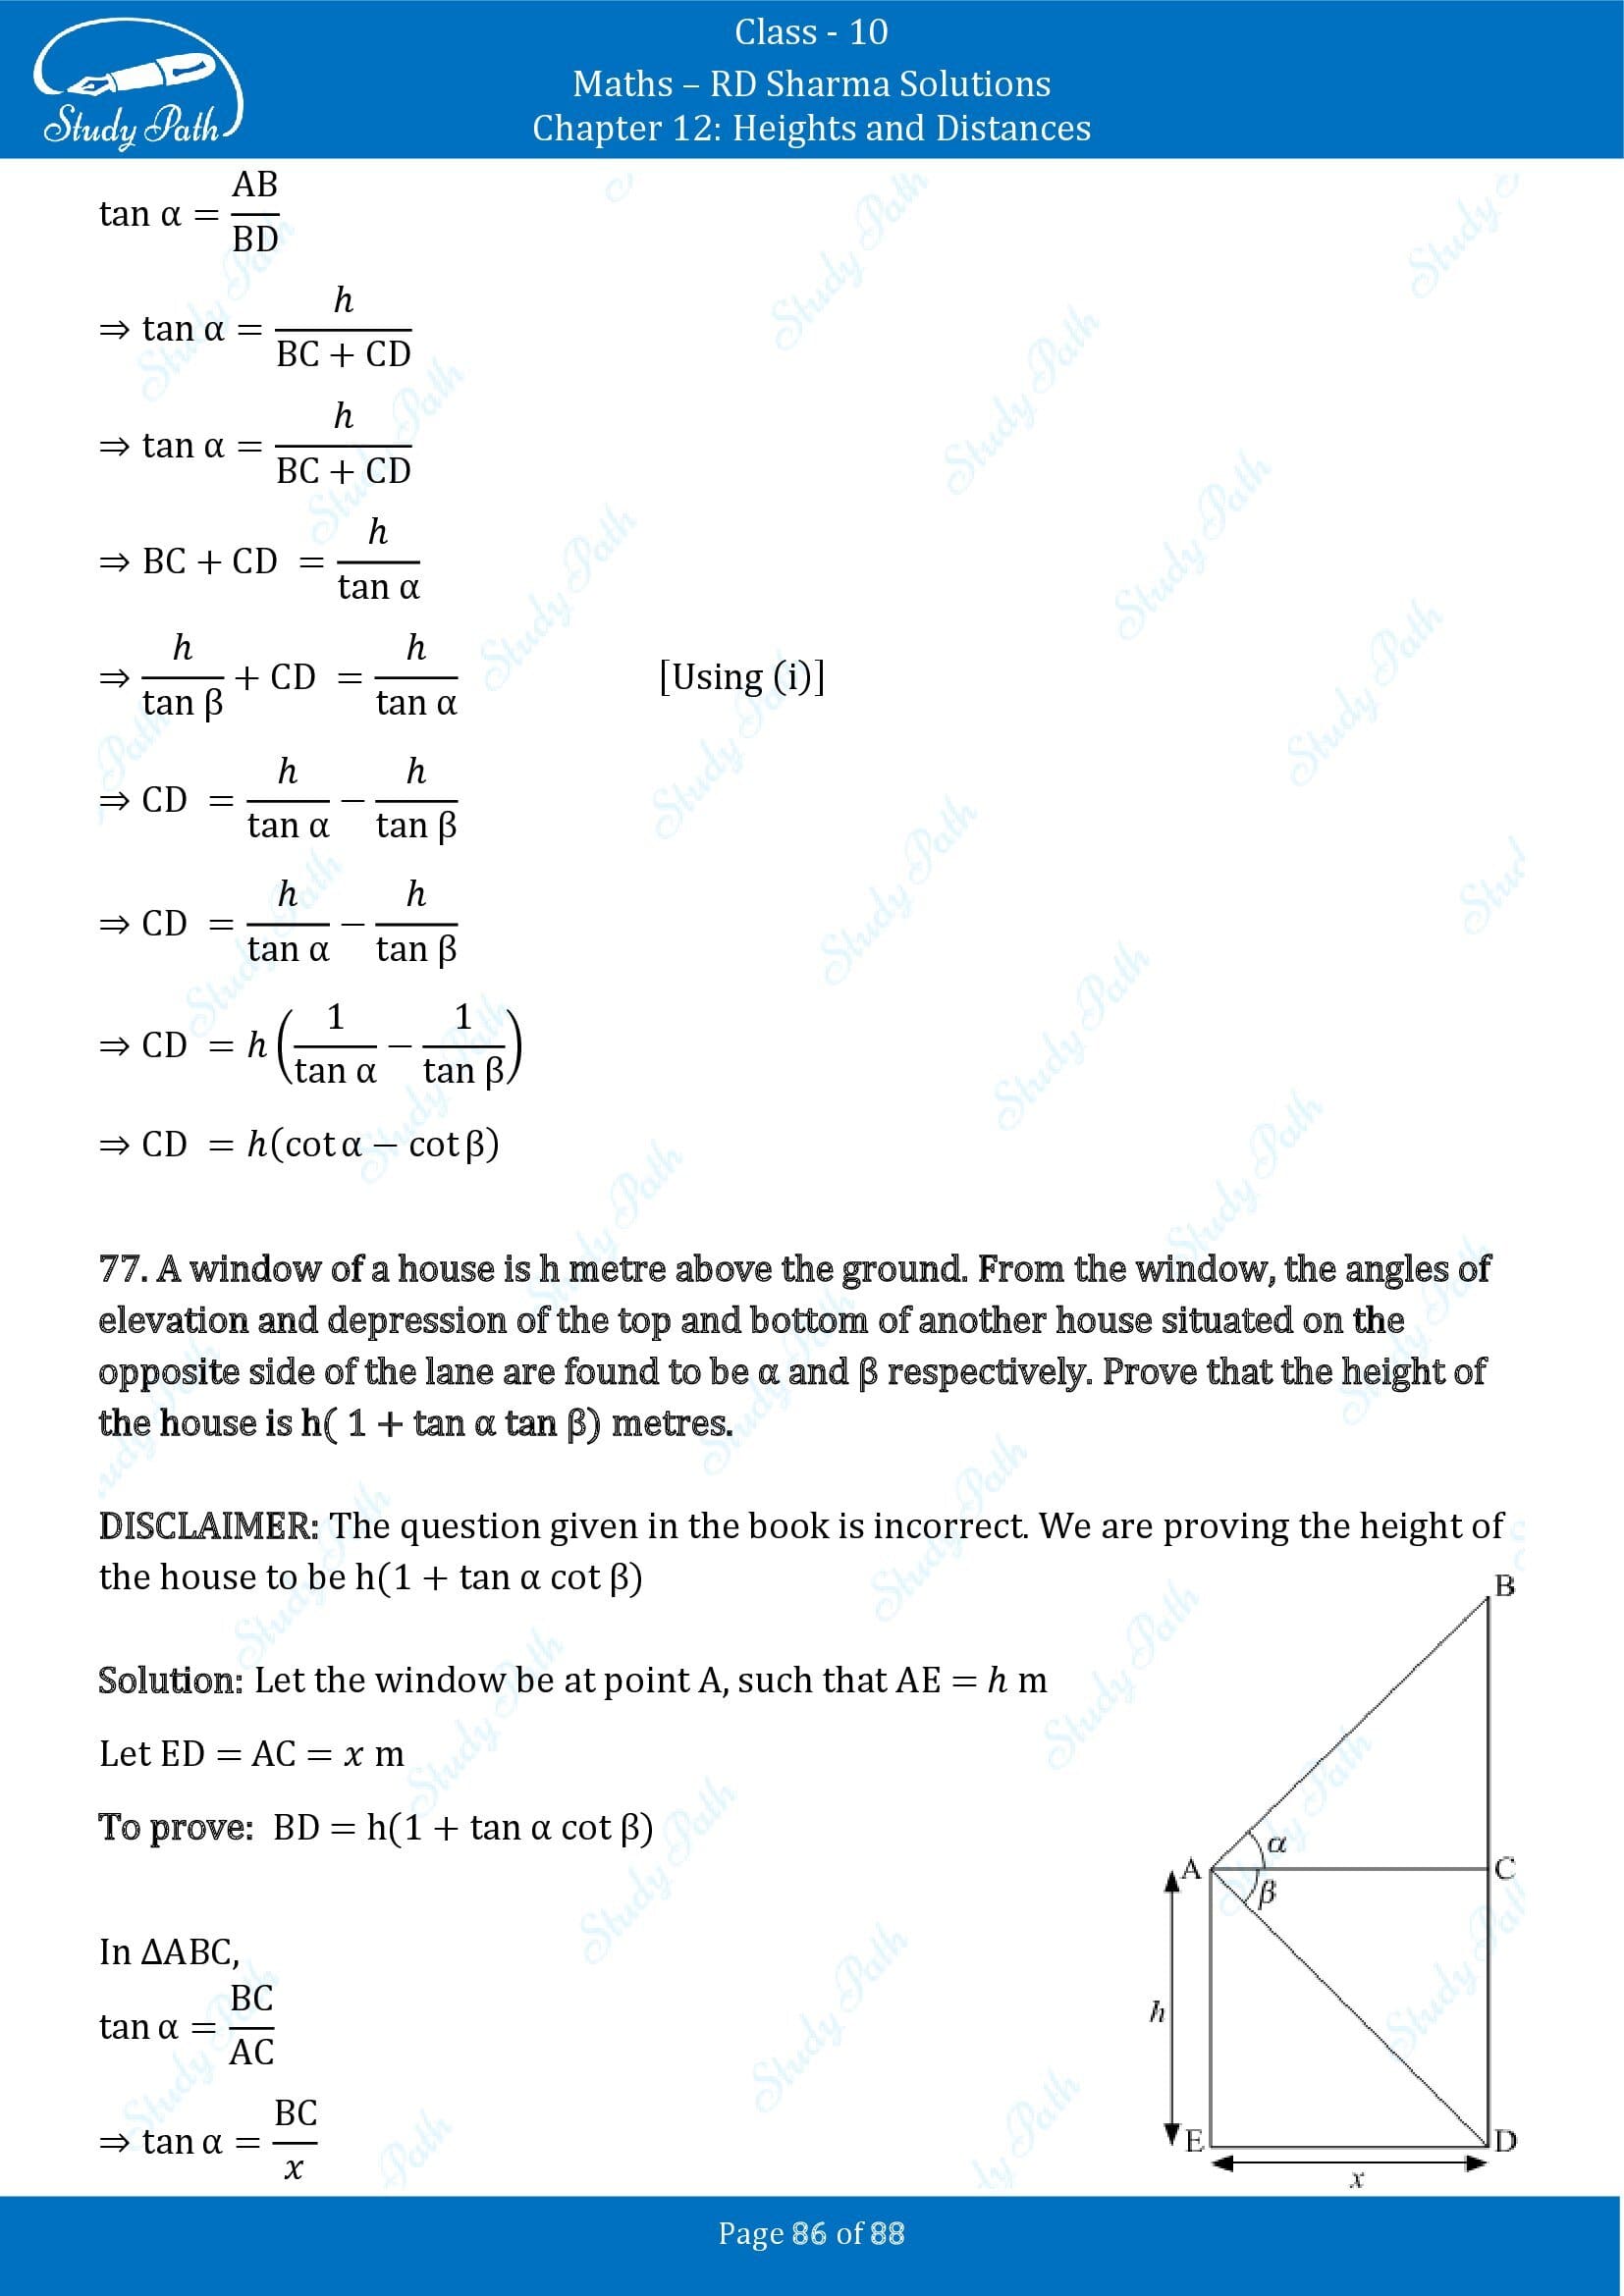 RD Sharma Solutions Class 10 Chapter 12 Heights and Distances Exercise 12.1 00086